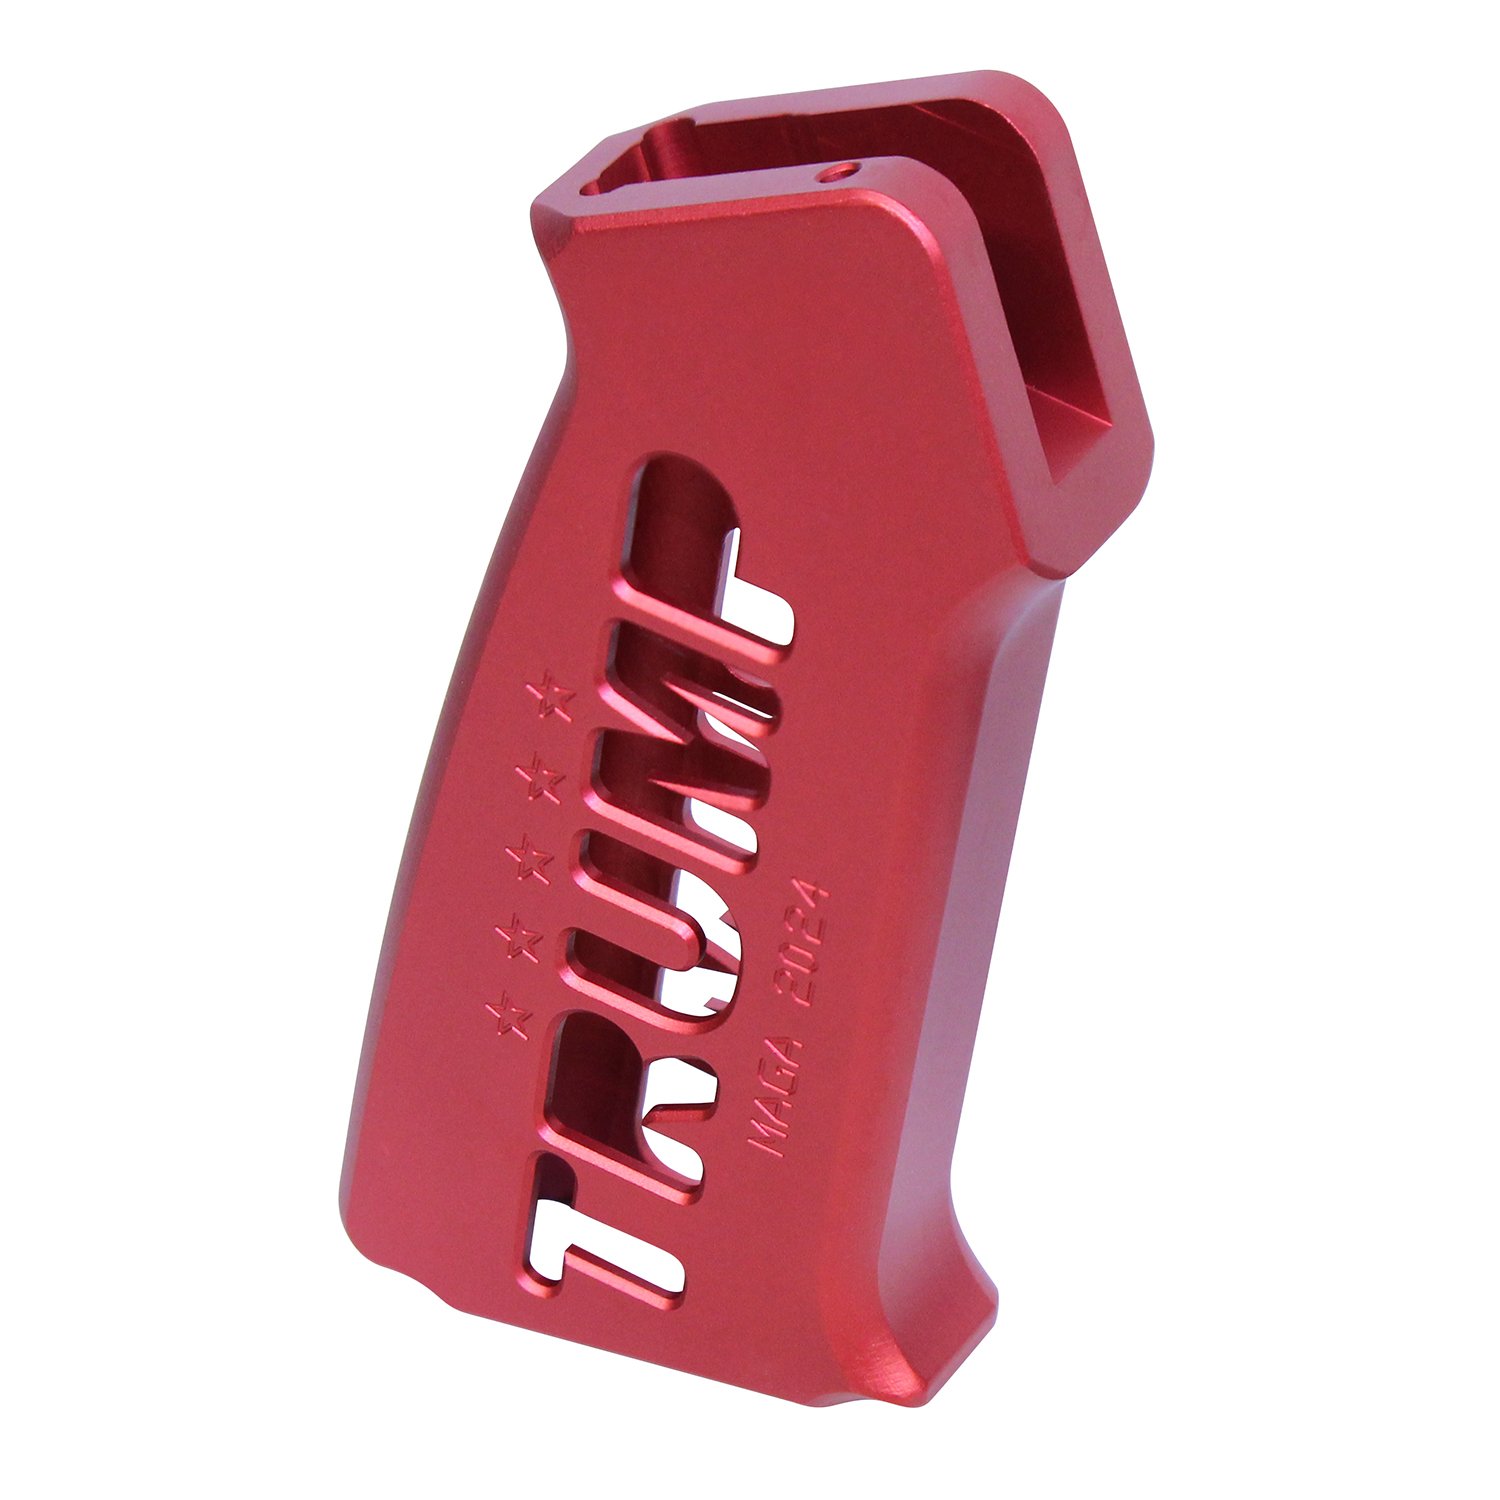 AR-15 "Trump Series" Limited Edition Pistol Grip (Anodized Red)